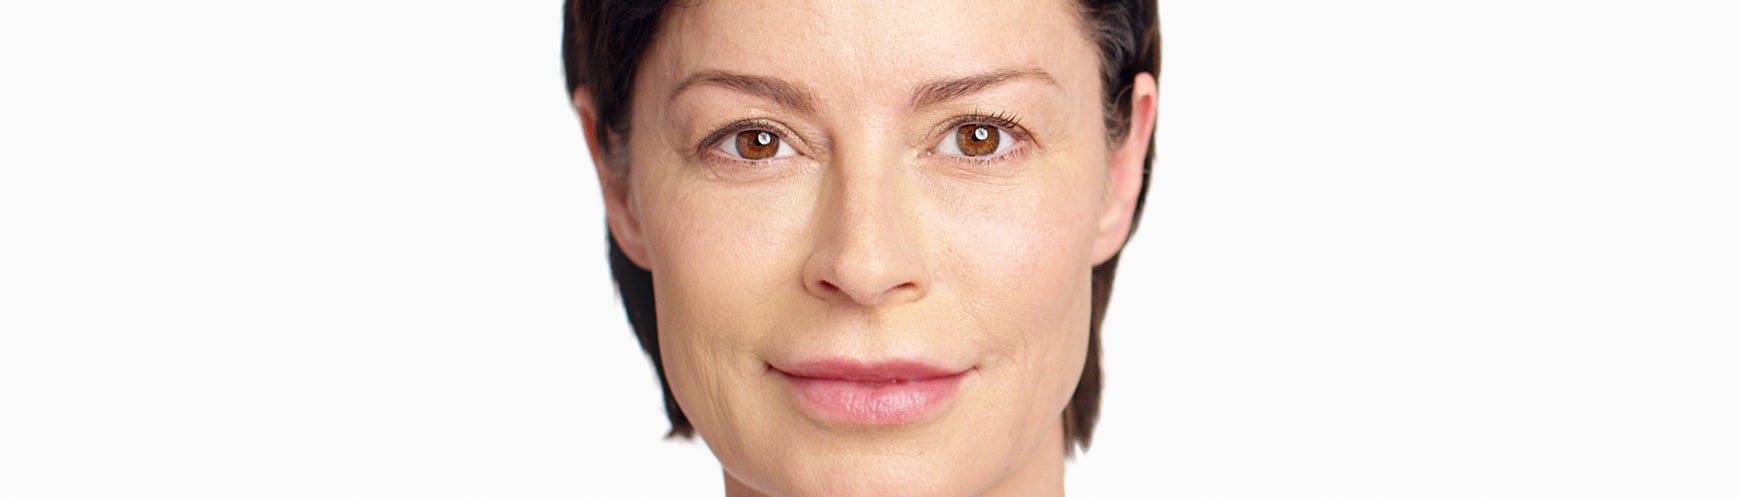 close up photo of a Caucasian woman with short hair with smooth and tight facial skin